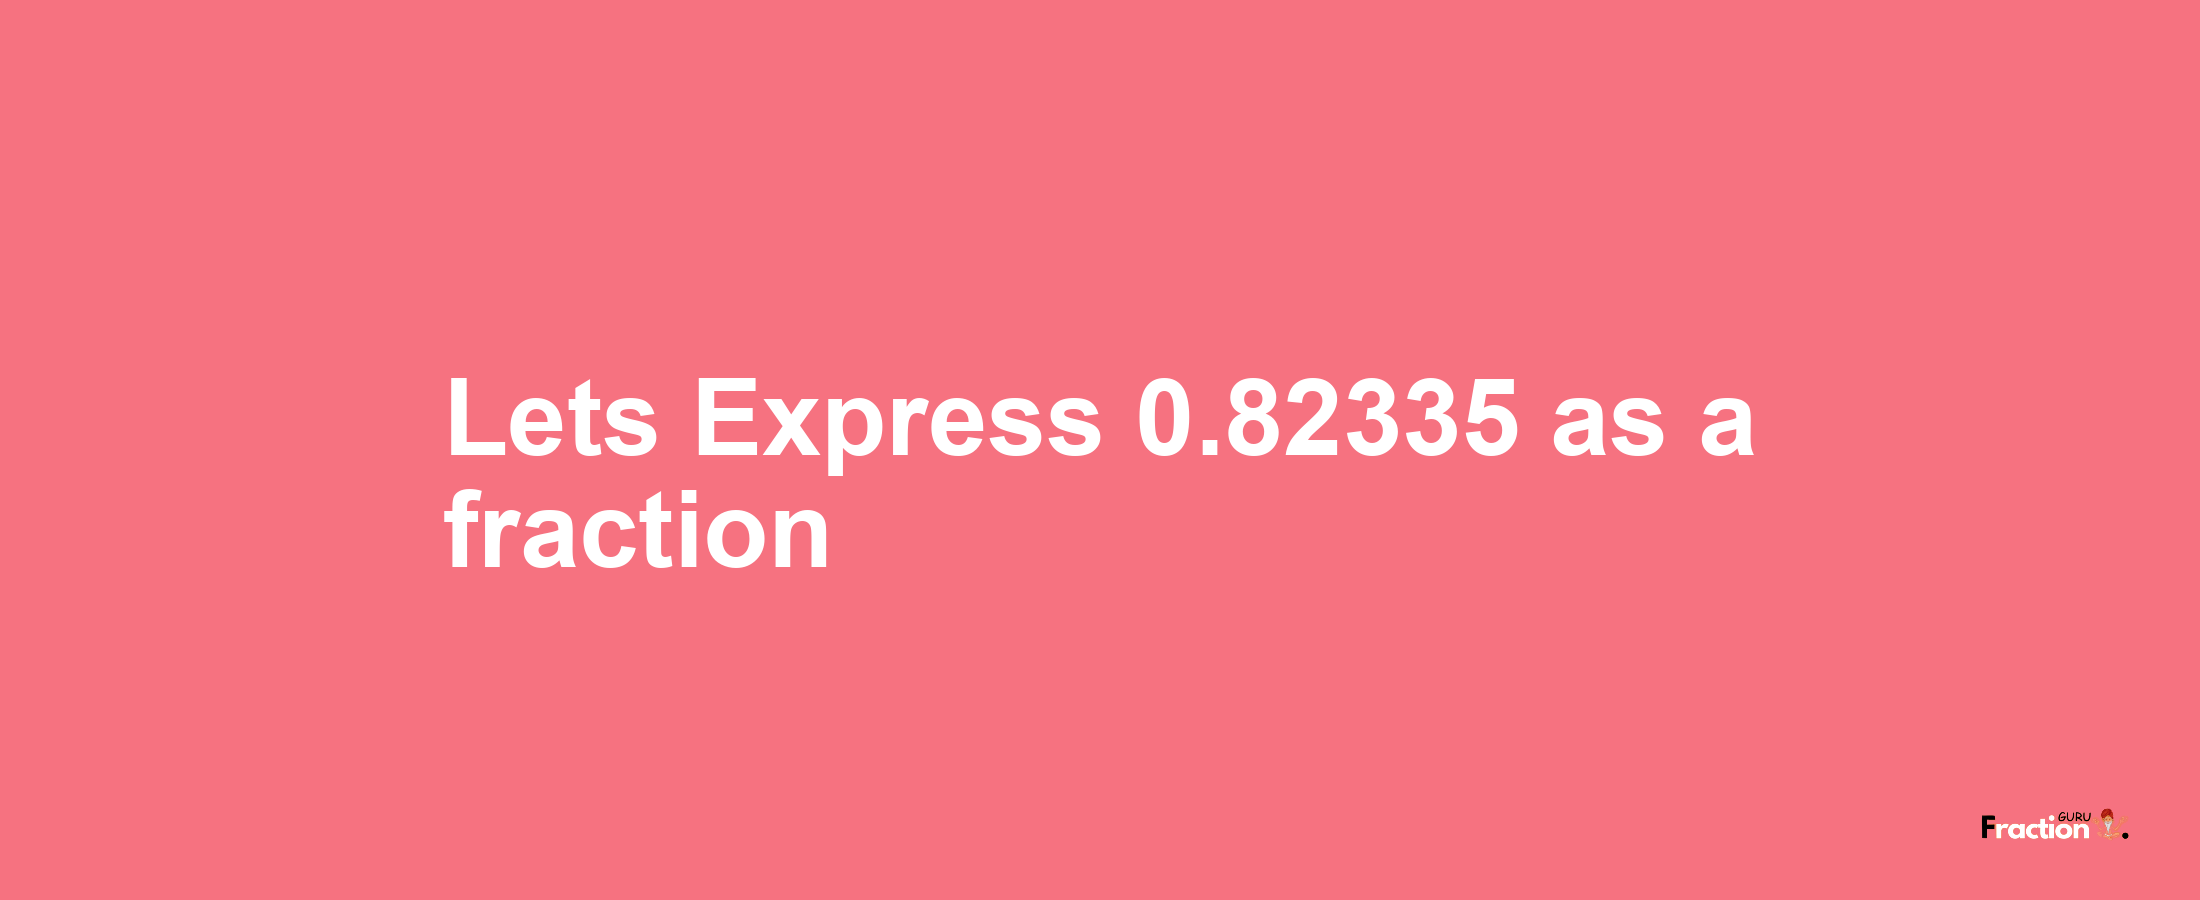 Lets Express 0.82335 as afraction